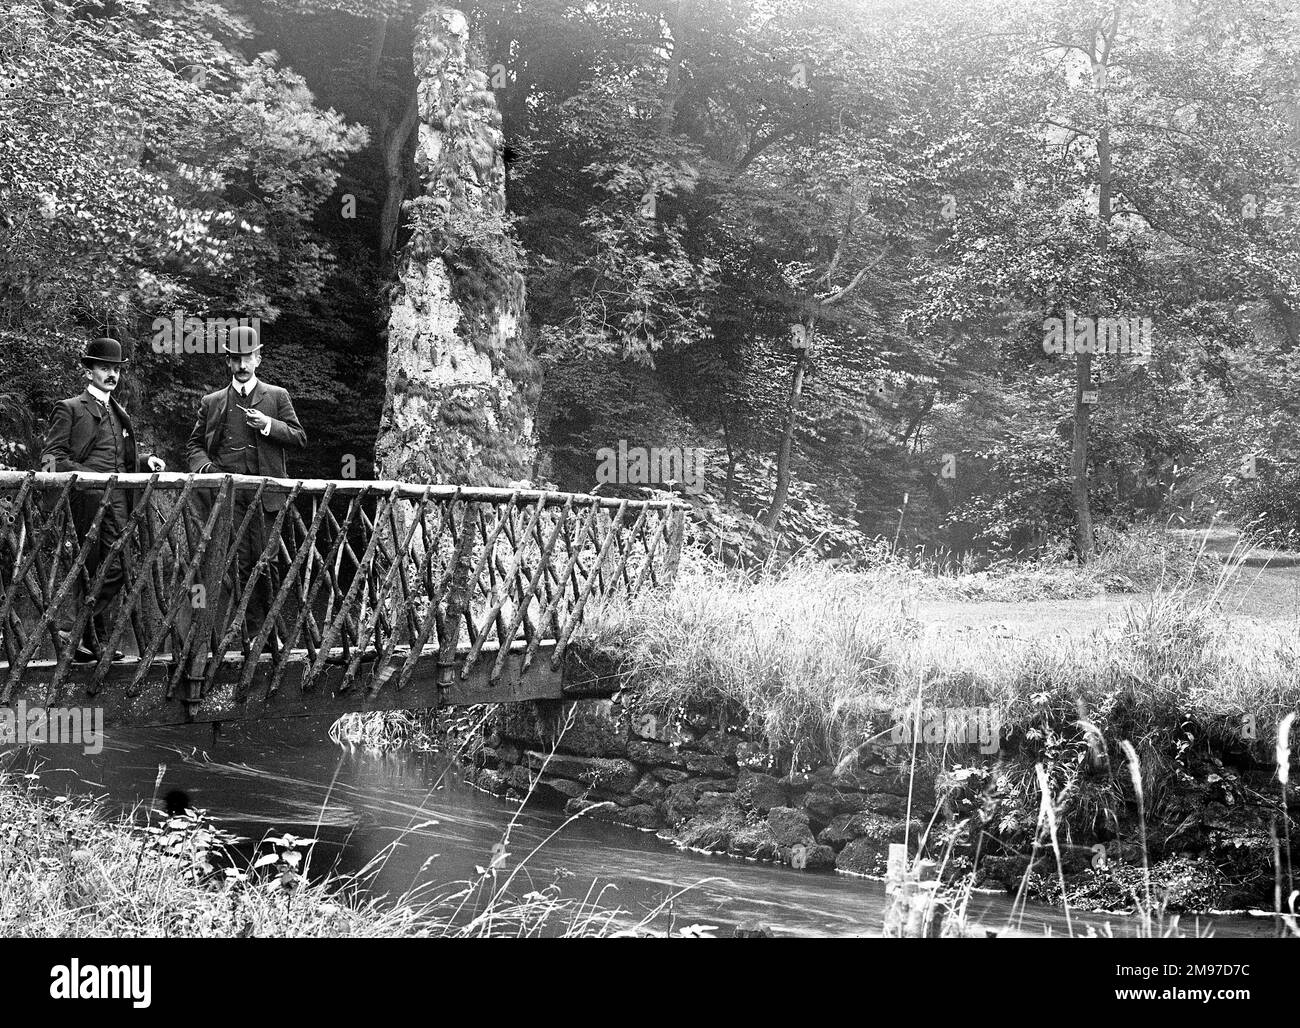 The man on the right on the bridge is Ernest Battersby - photographed in the Peak District around 1906. Next to him is a man identified as Ted Ellis. Stock Photo